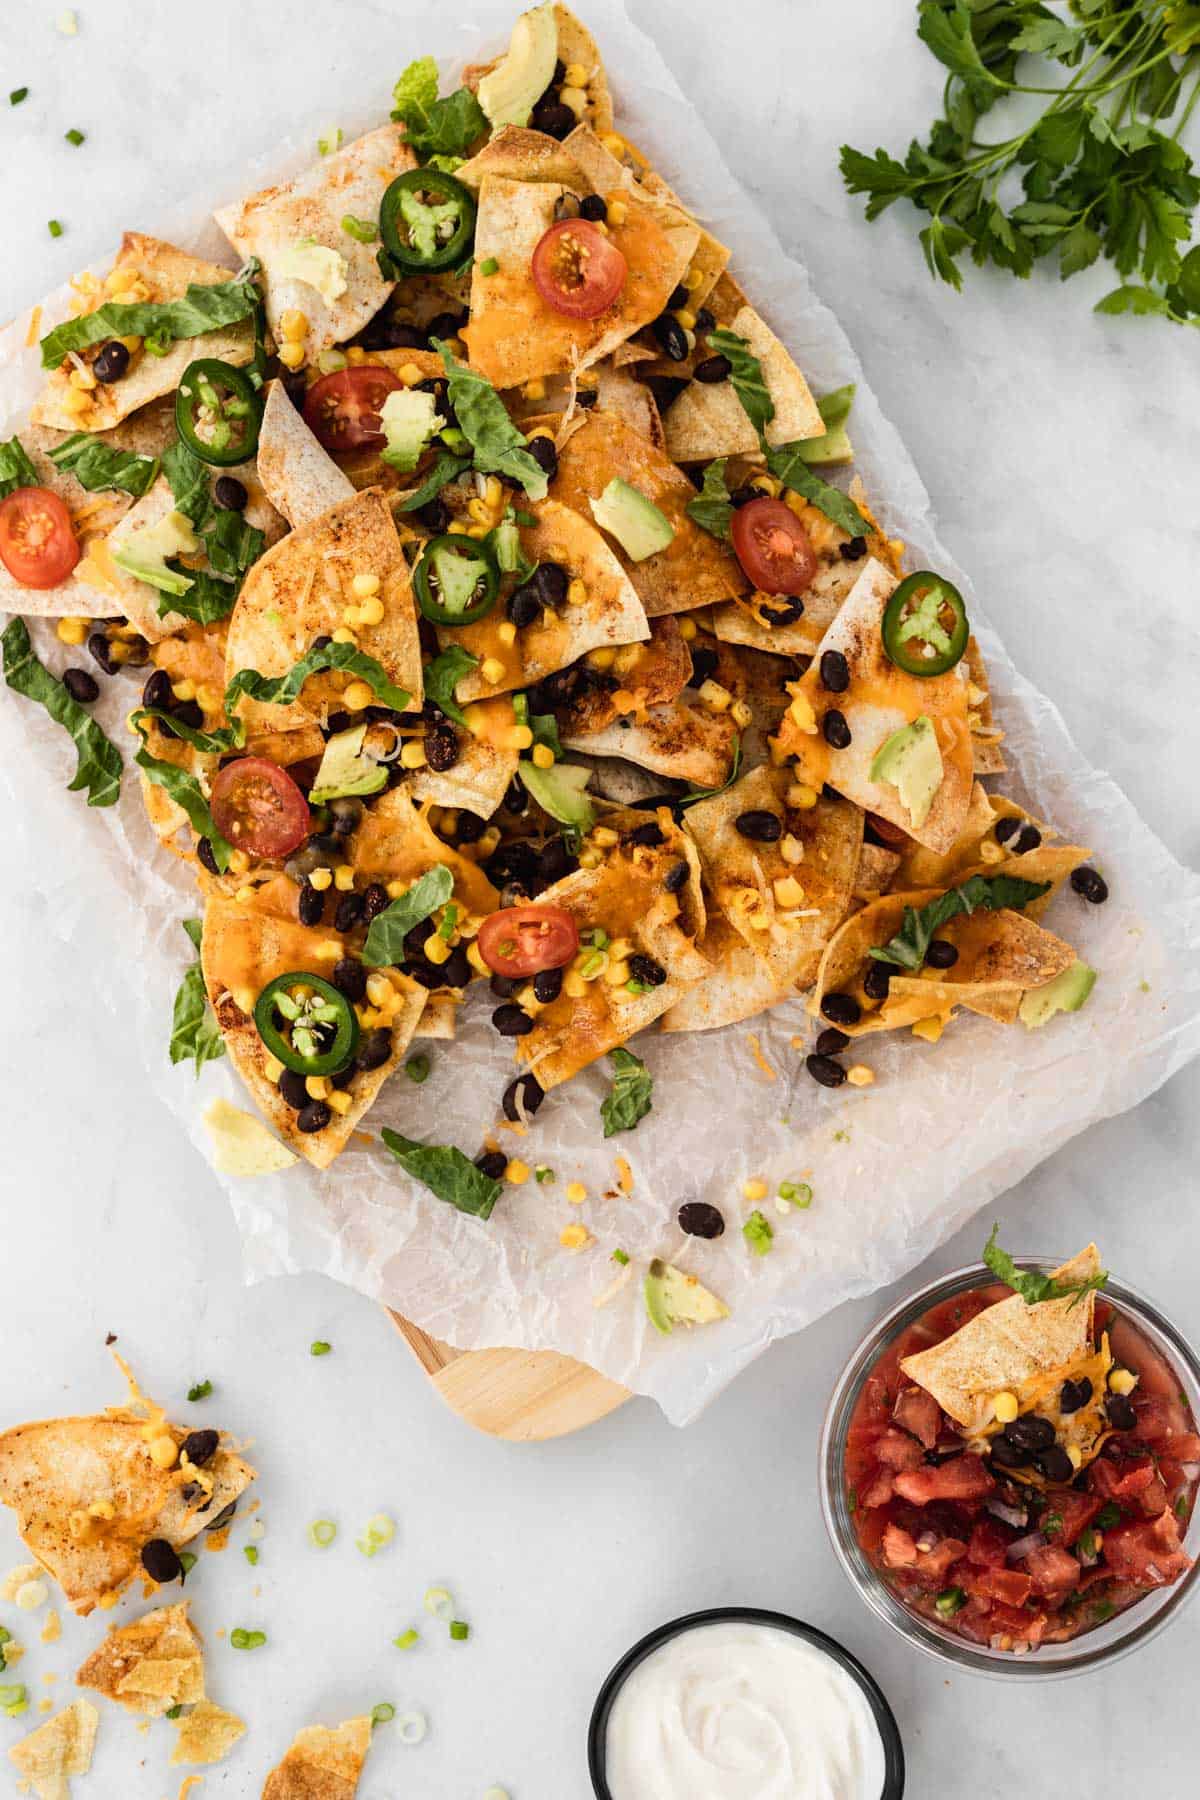 Nachos on top of parchment paper surrounded by broken chips and bowls of sour cream and salsa.